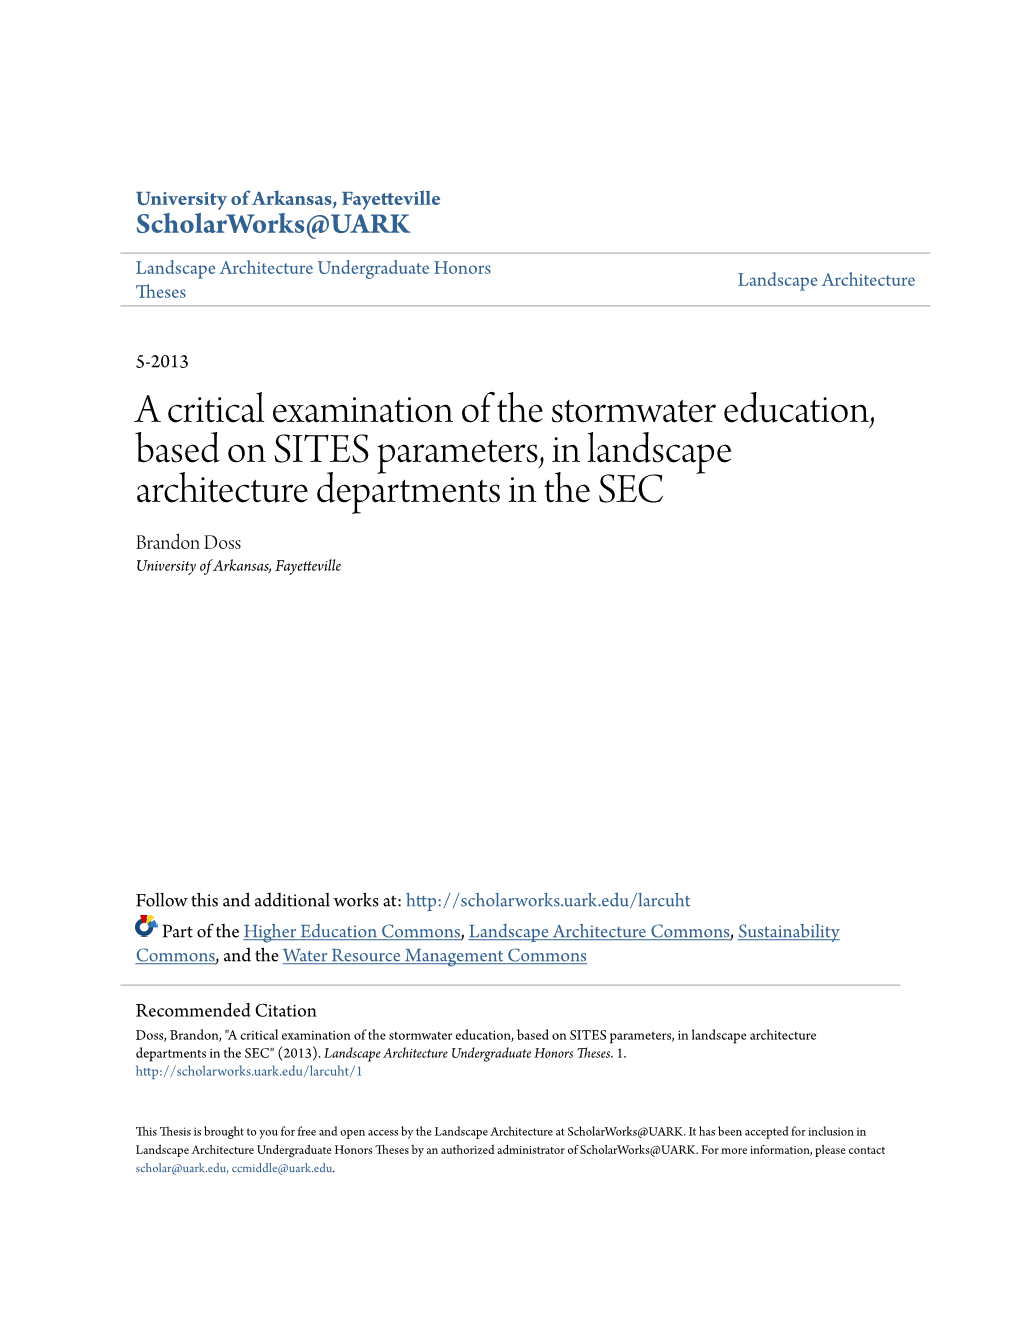 A Critical Examination of the Stormwater Education, Based on SITES Parameters, in Landscape Architecture Departments in The